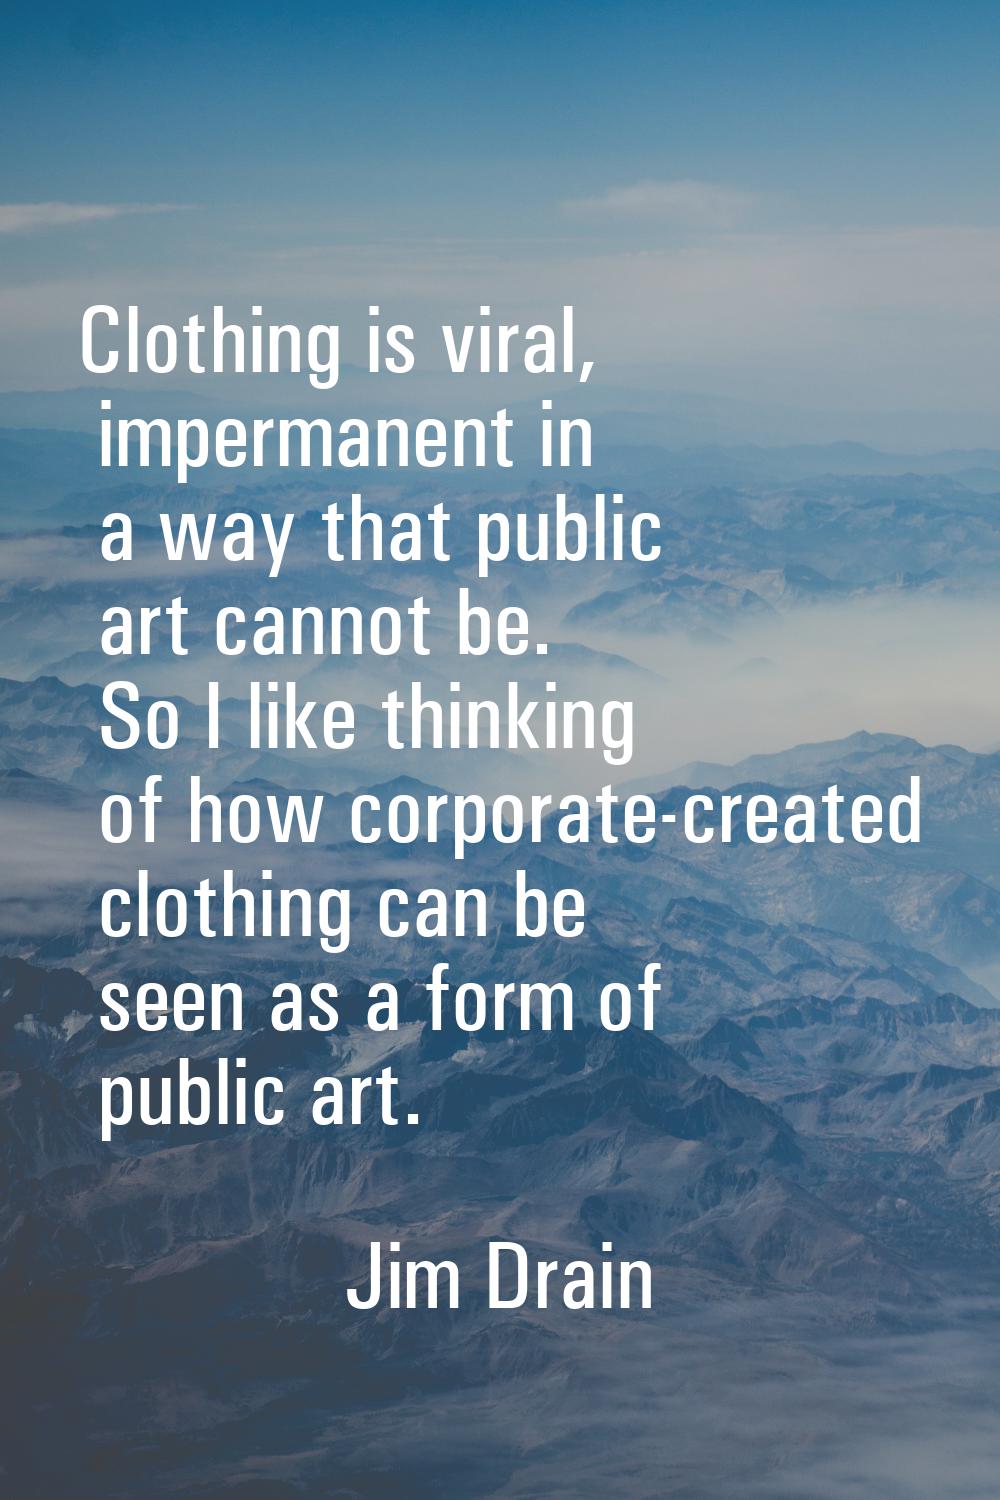 Clothing is viral, impermanent in a way that public art cannot be. So I like thinking of how corpor